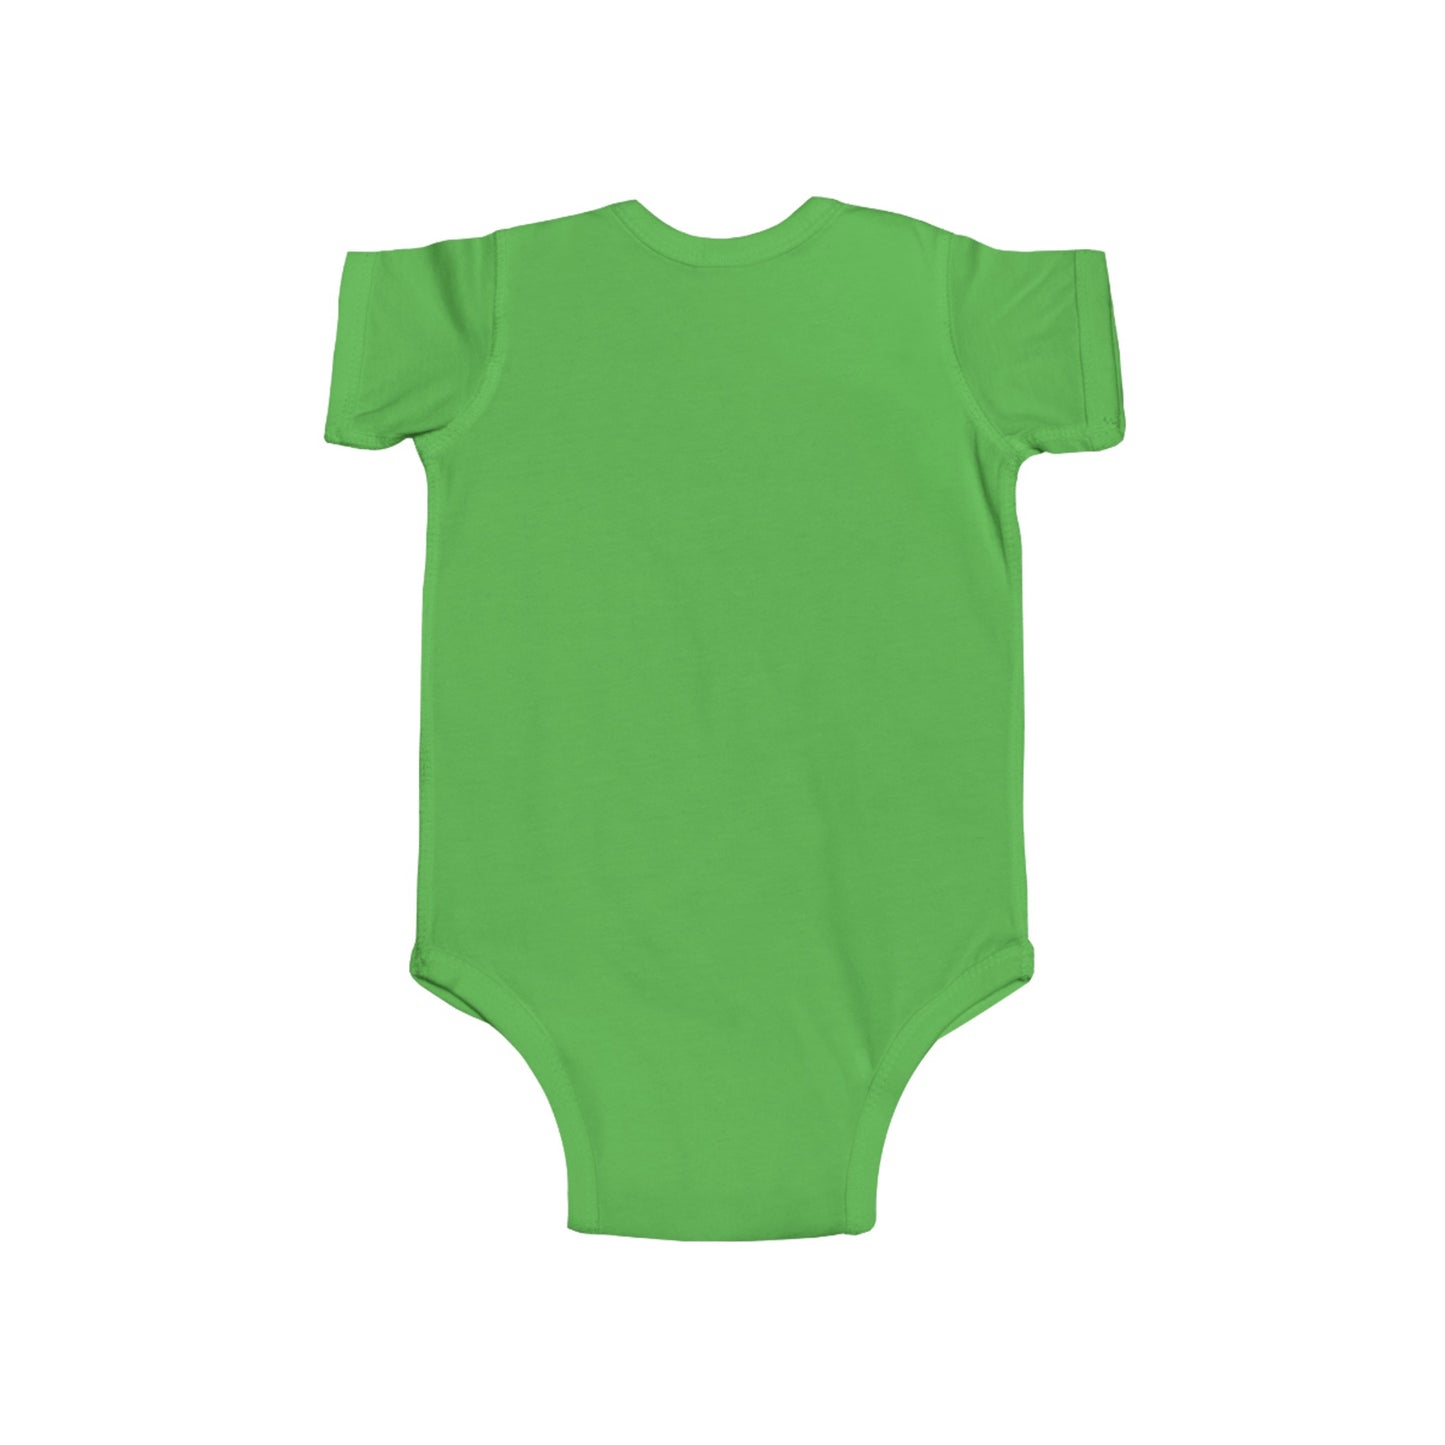 Mother Mary and Baby Jesus-  Unisex Infant Jersey Bodysuit